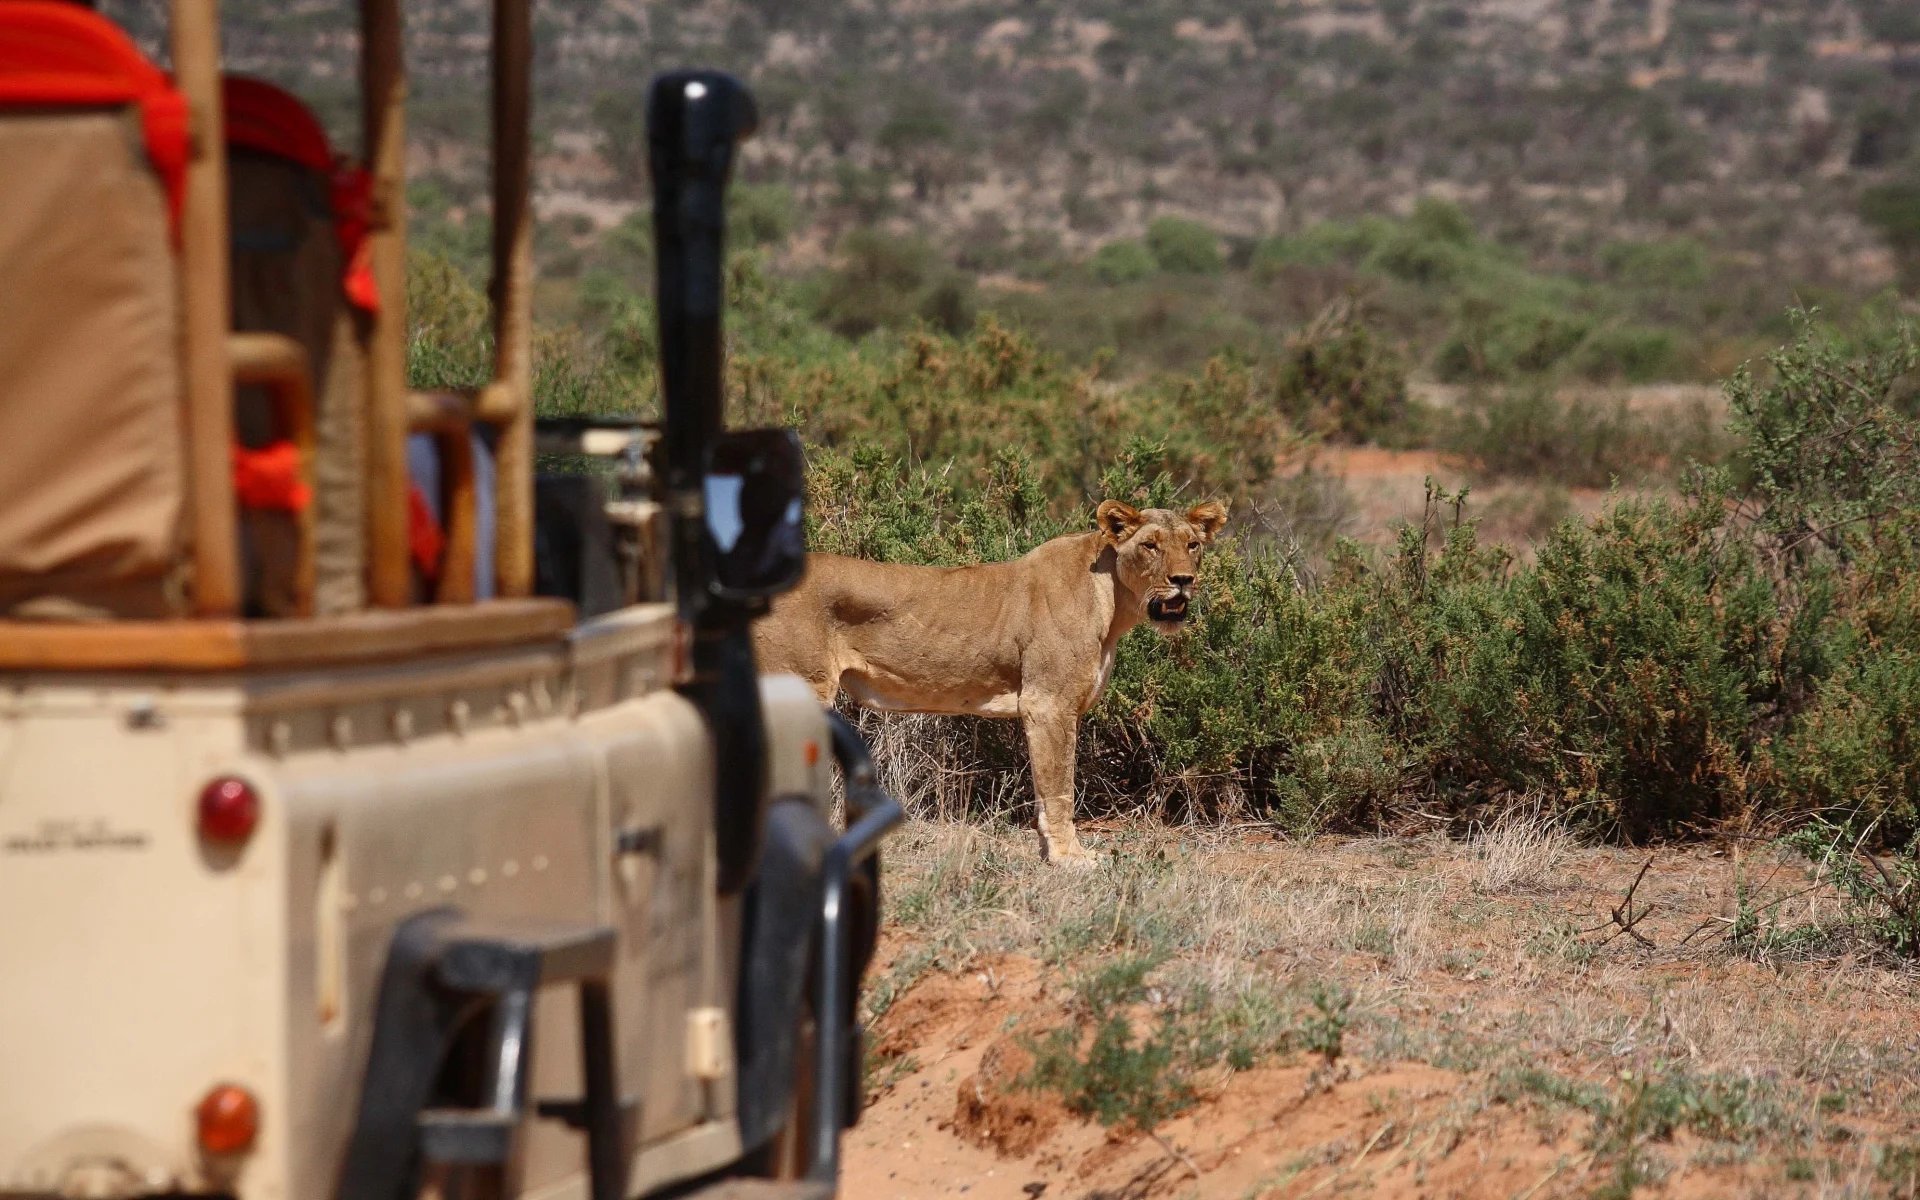 A lioness stands ahead of a 4x4 vehicle during a daytime game drive on the Samburu reserve.